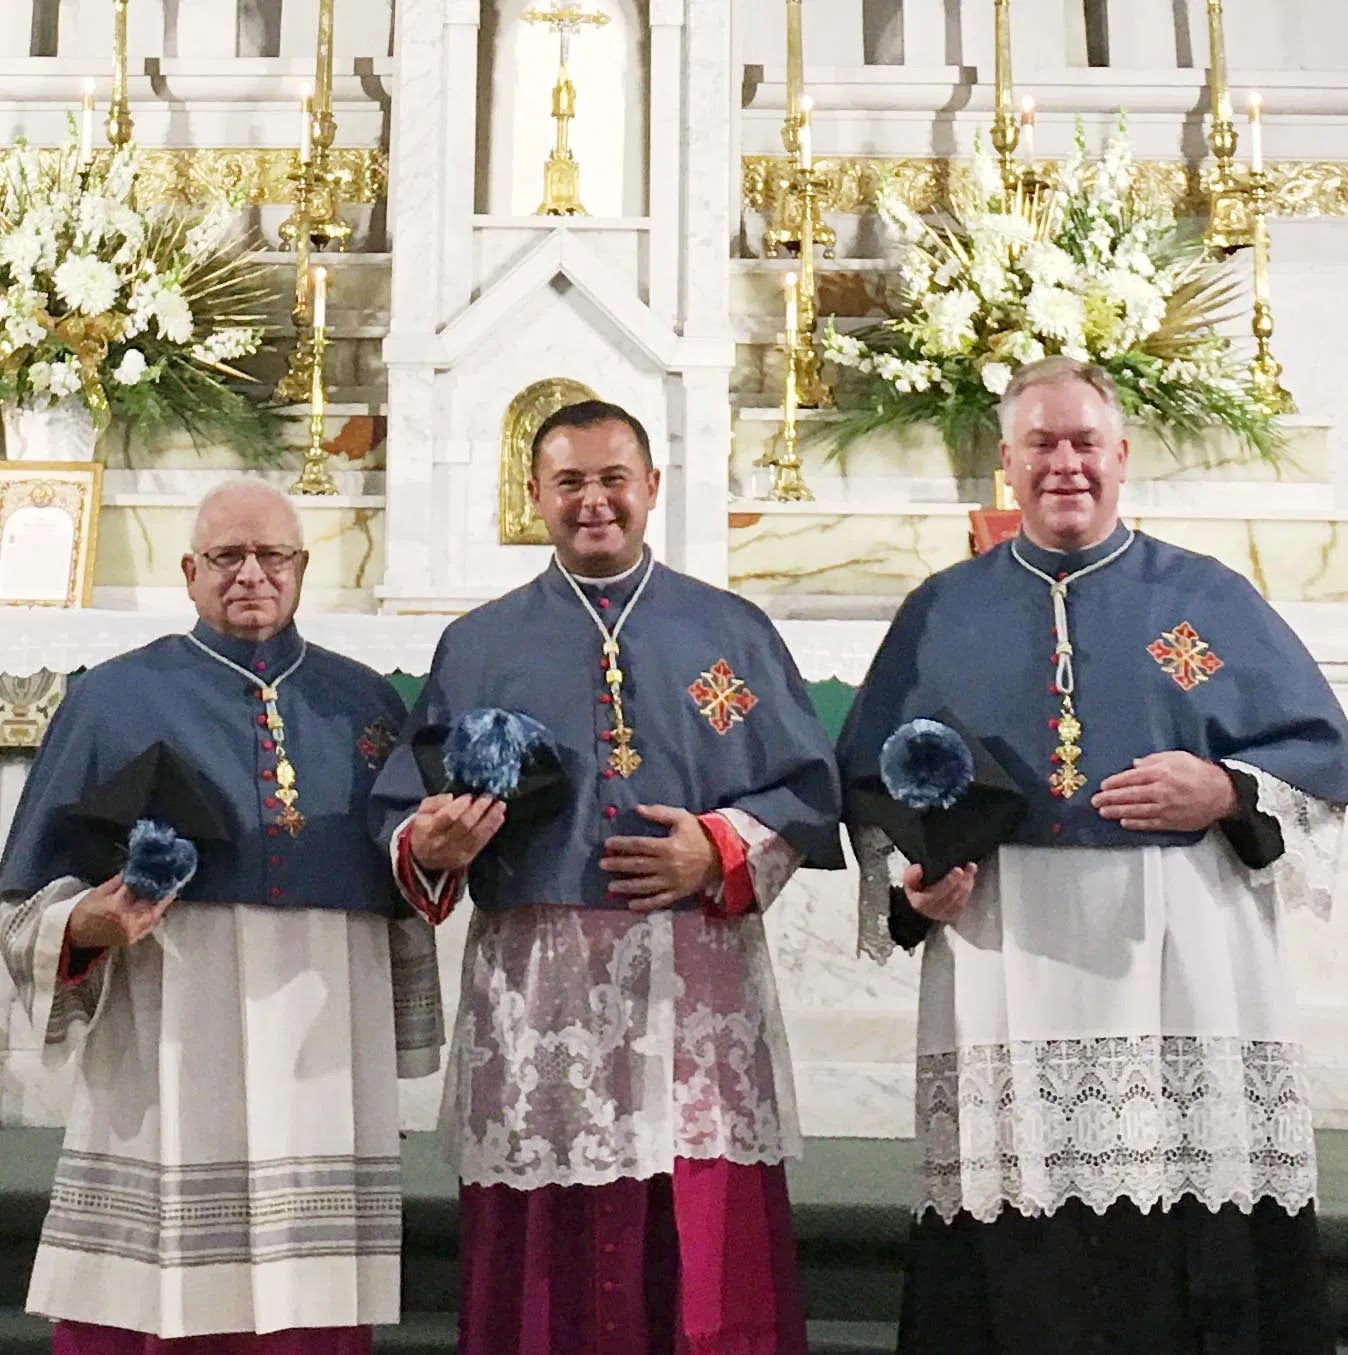 Local Priests Inducted into Sacred Order